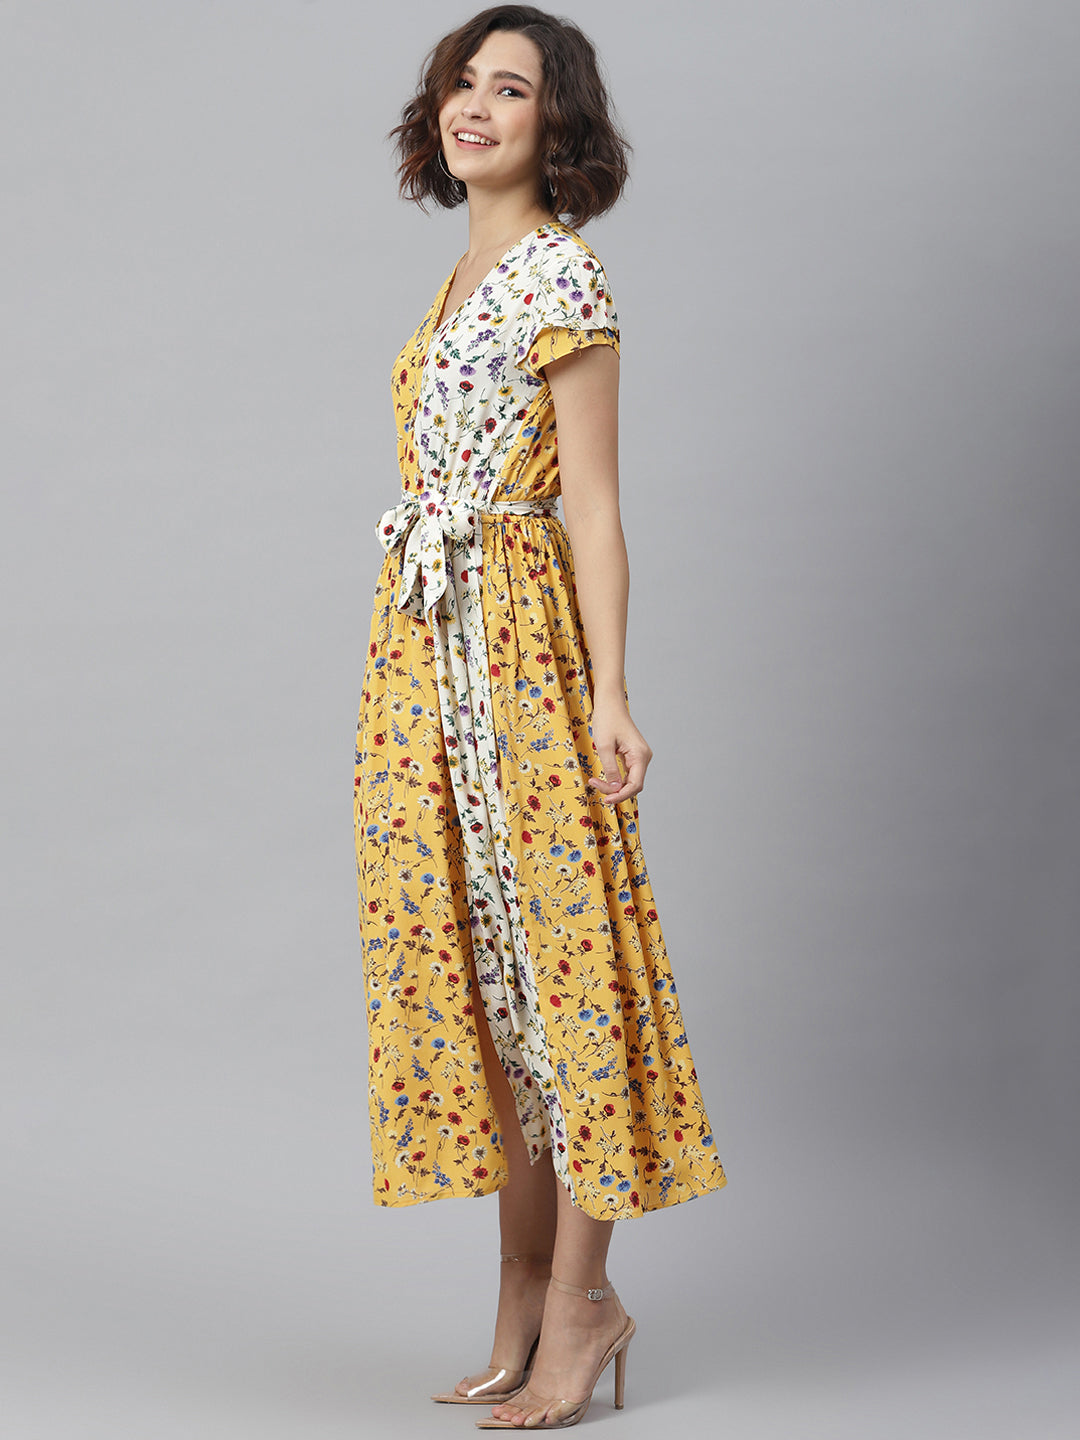 Yellow-&-White-Polyester-Wrap-Dress-With-Contrast-Panel